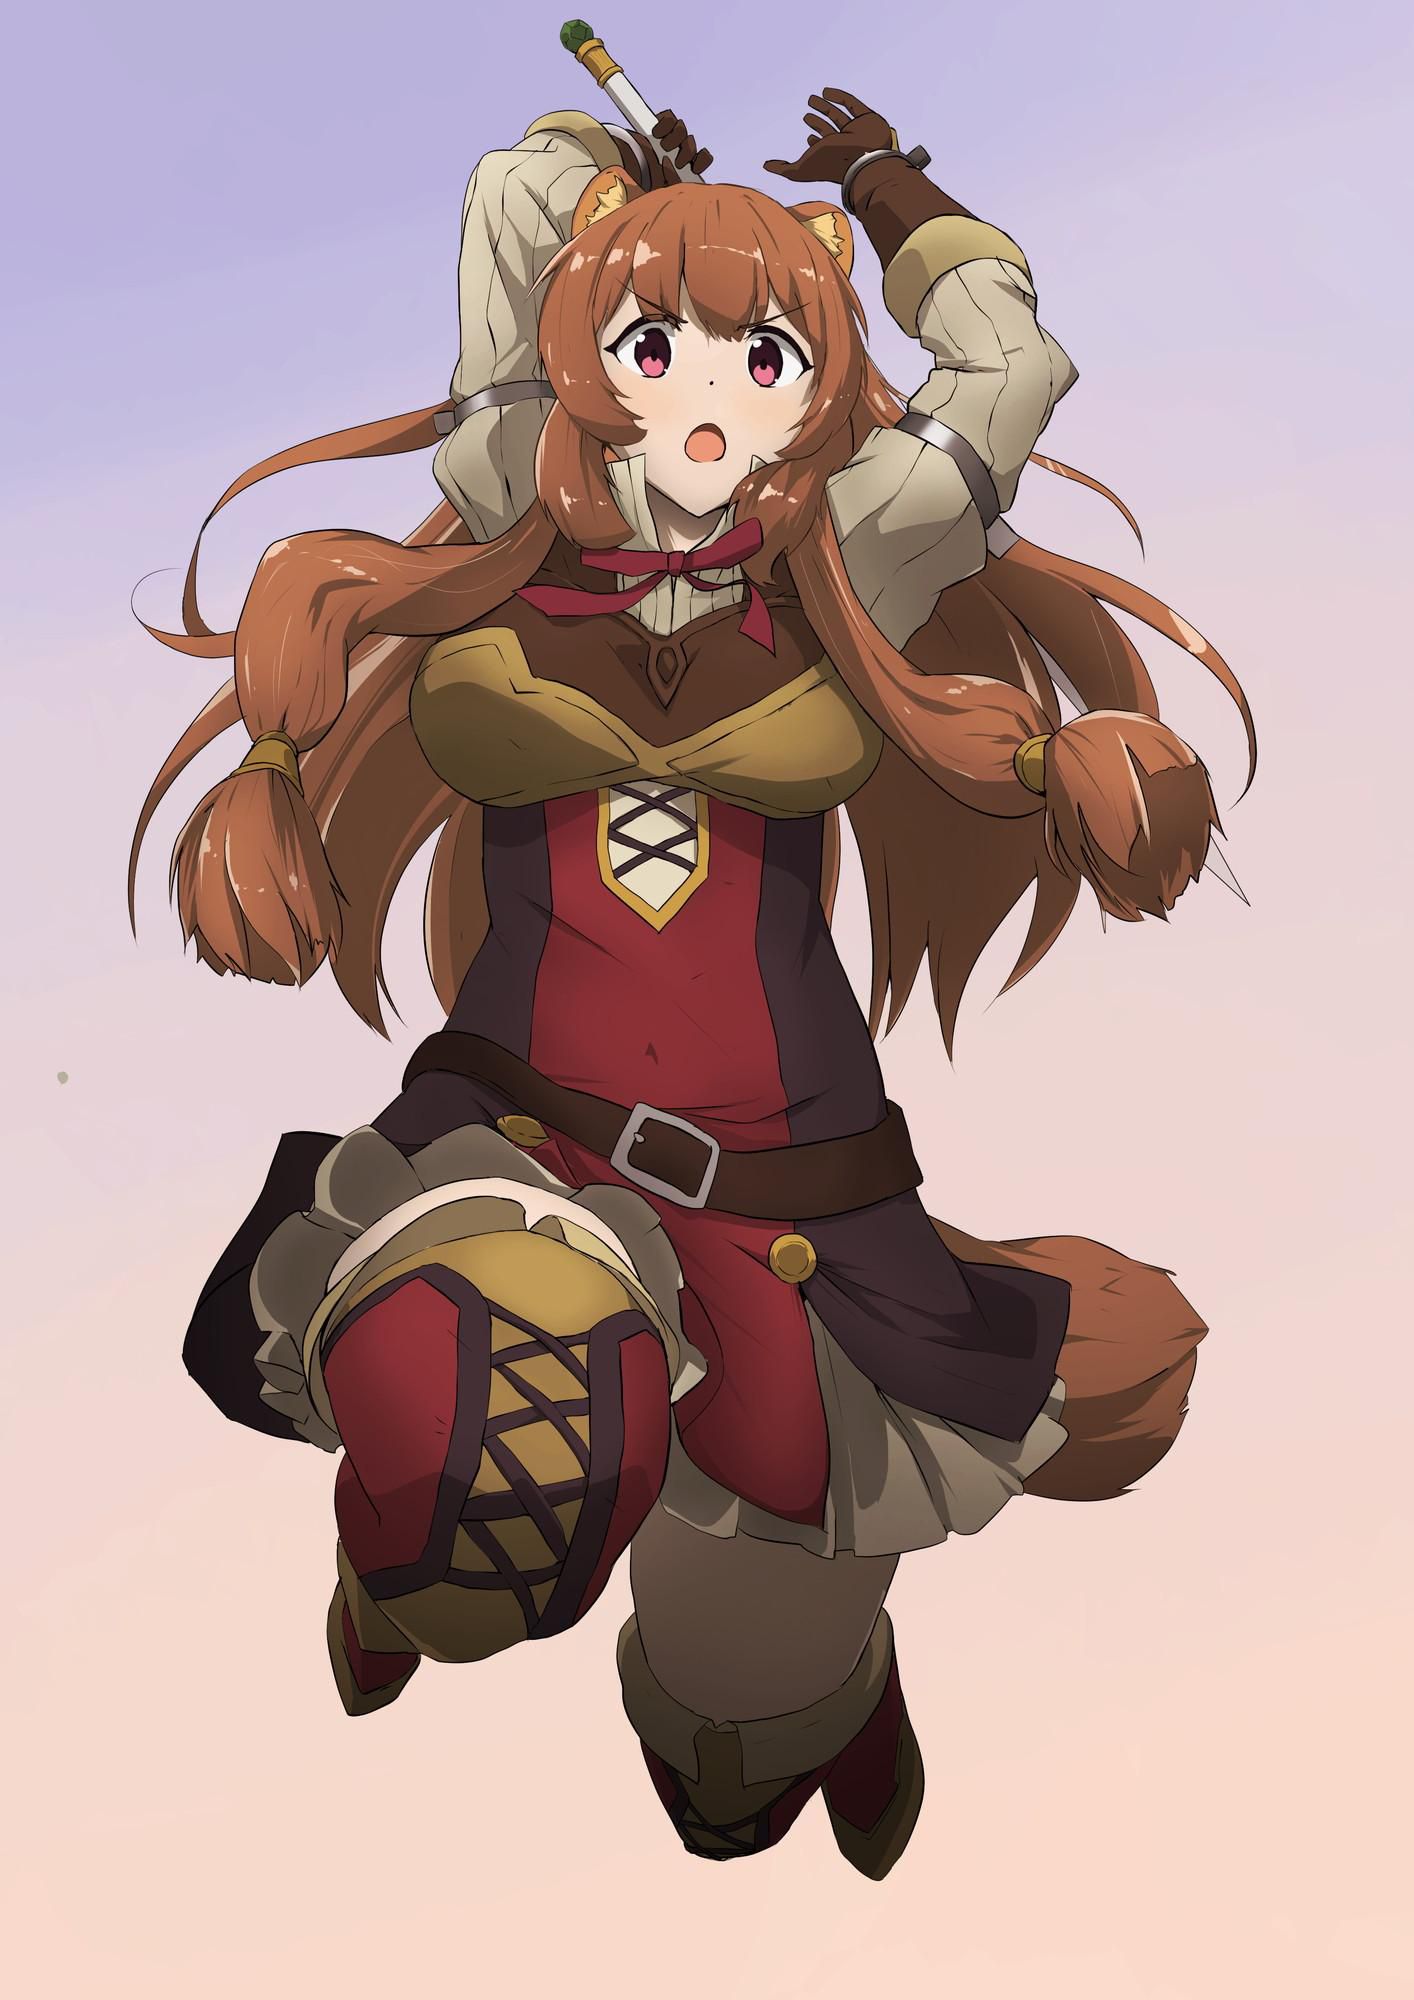 I'll stick it because I wanted to pull it out with the erotic image of the rise of the shield hero 20